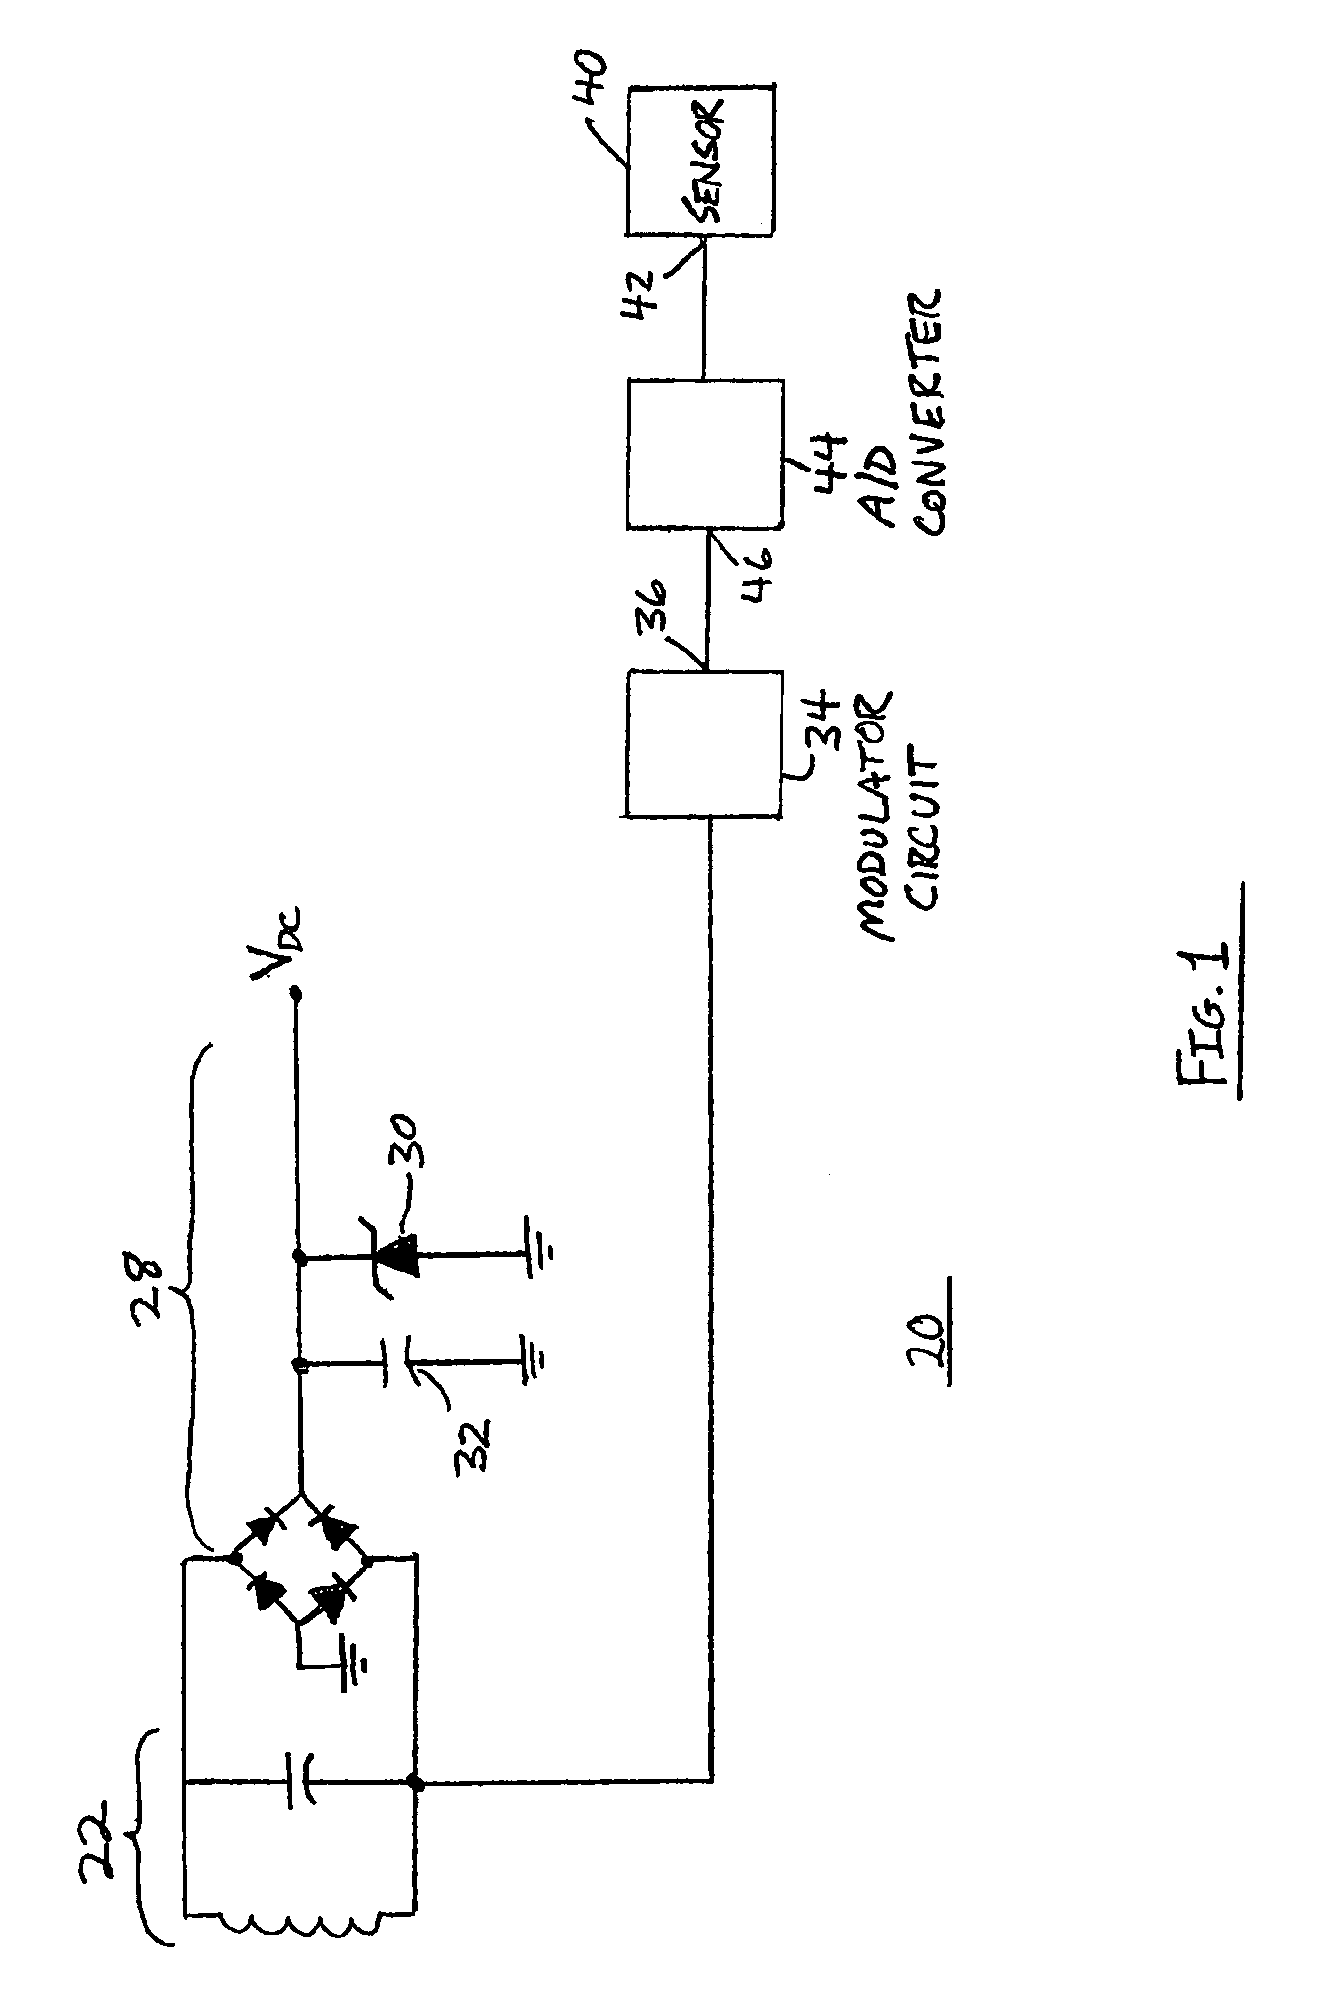 System and method for measuring a plurality of physical variables from a remote location